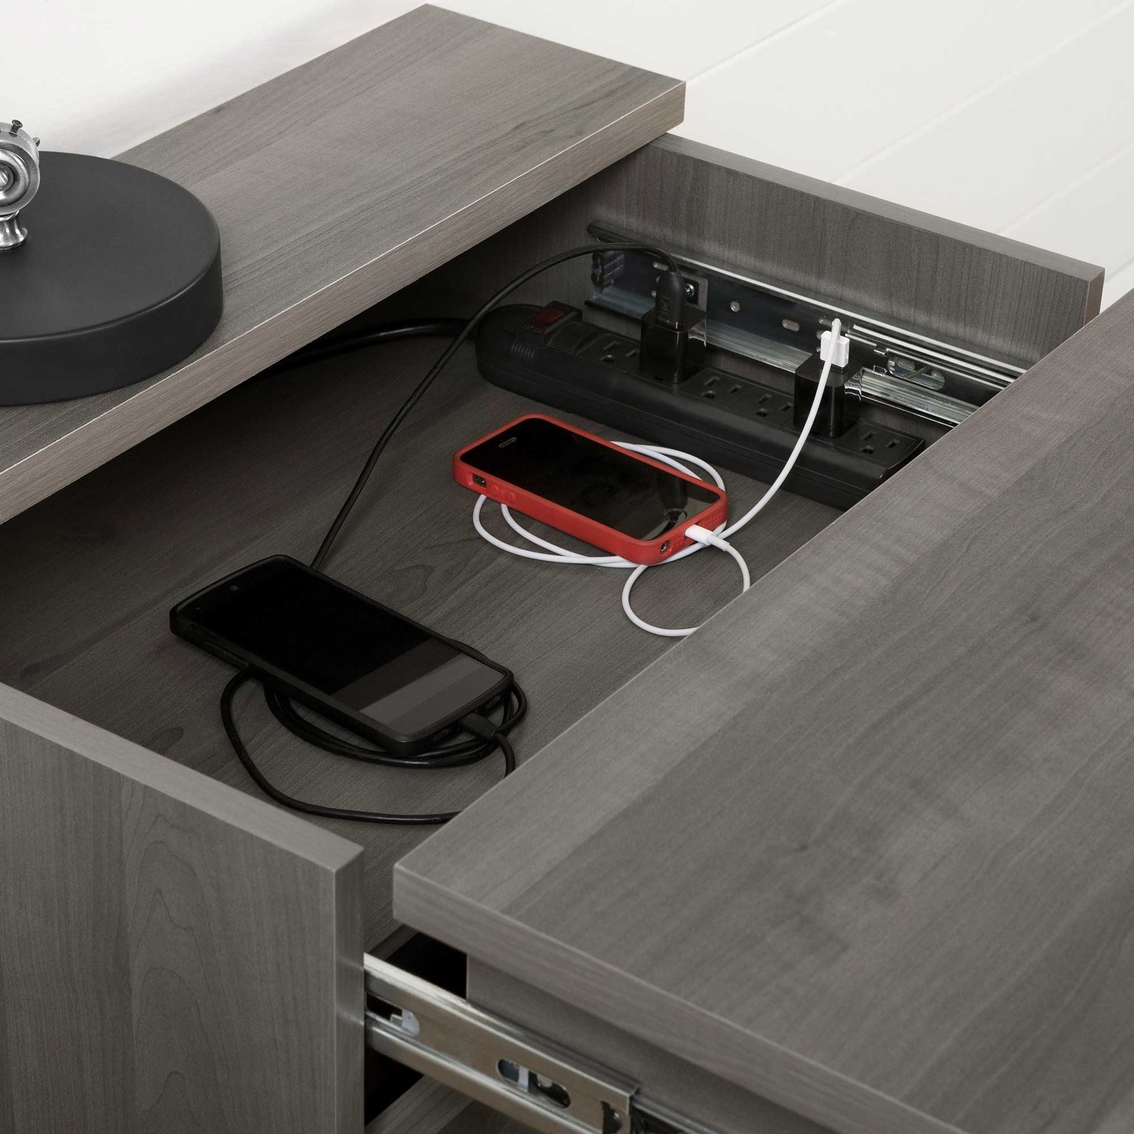 South Shore Versa Nightstand Charging Station - Image 3 of 10